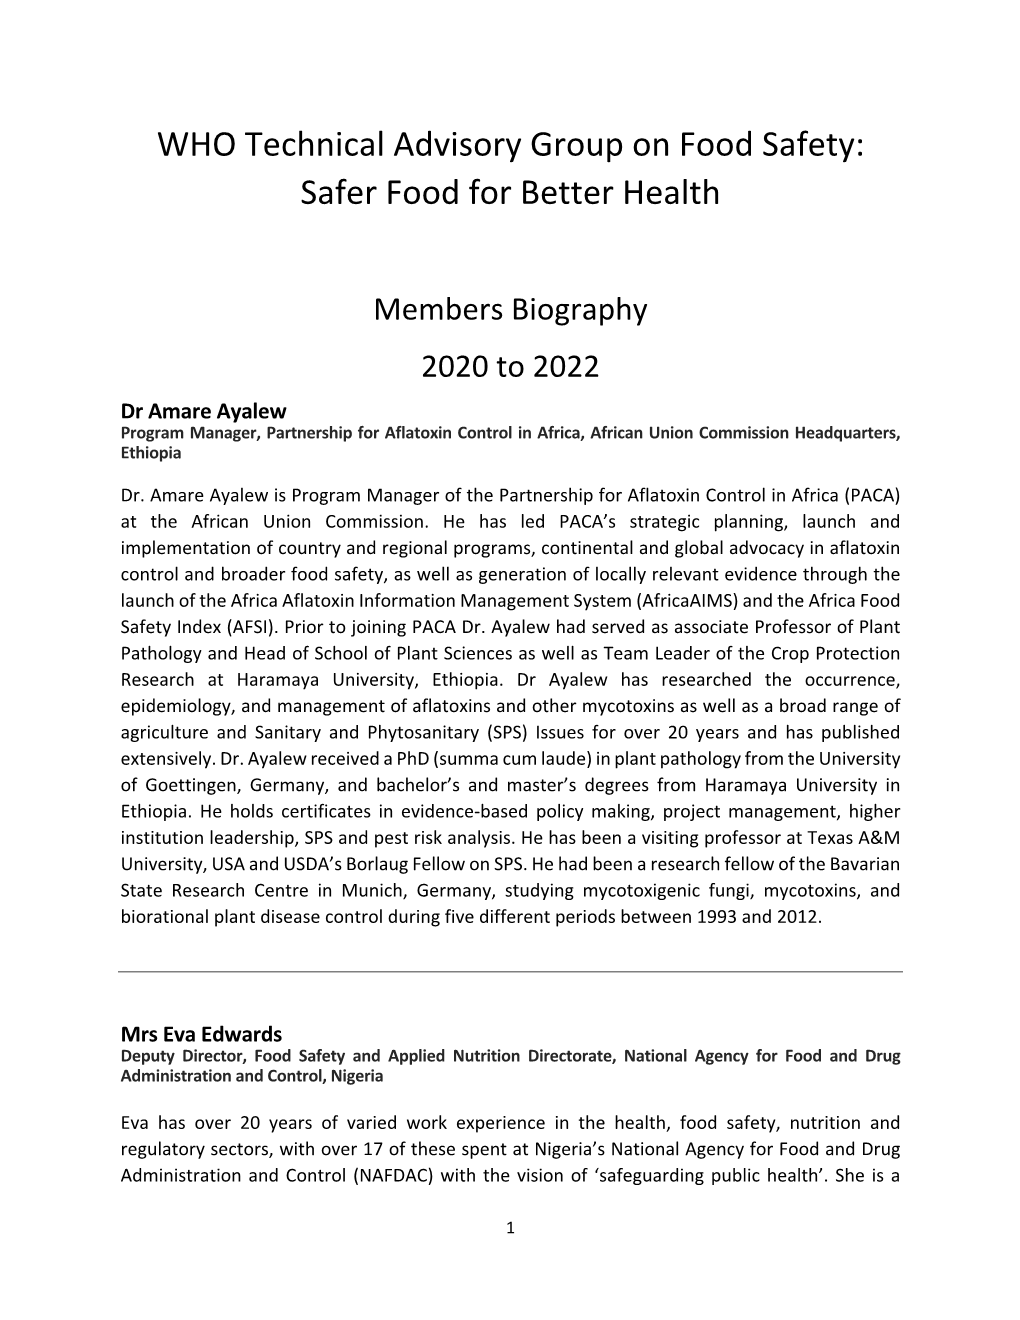 WHO Technical Advisory Group on Food Safety: Safer Food for Better Health